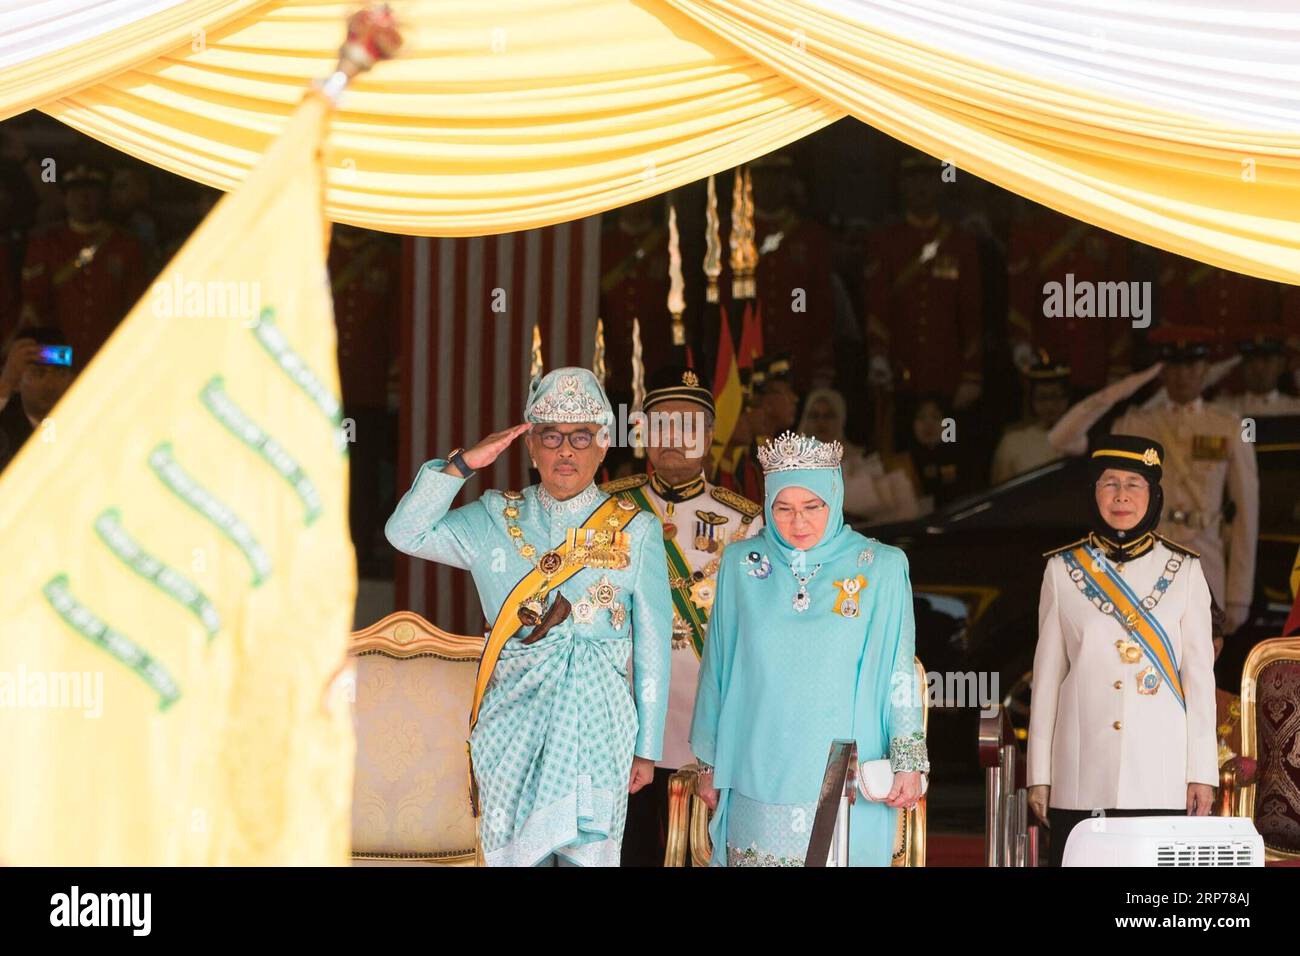 (190131) -- KUALA LUMPUR, Jan. 31, 2019 (Xinhua) -- Sultan Abdullah Sultan Ahmad Shah (L, front) attends the welcome ceremony at the parliament square in Kuala Lumpur, Malaysia, Jan. 31, 2019. Sultan Abdullah Sultan Ahmad Shah was sworn in as Malaysia s 16th king in a ceremony at the national palace on Thursday. Malaysia is a constitutional monarchy, with nine sultans or rulers, who head their respective state and act as the religious leader, taking turns to serve as the king for a five-year term. (Xinhua/Zhu Wei) MAYLASIA-KUALA LUMPUR-NEW KING PUBLICATIONxNOTxINxCHN Stock Photo